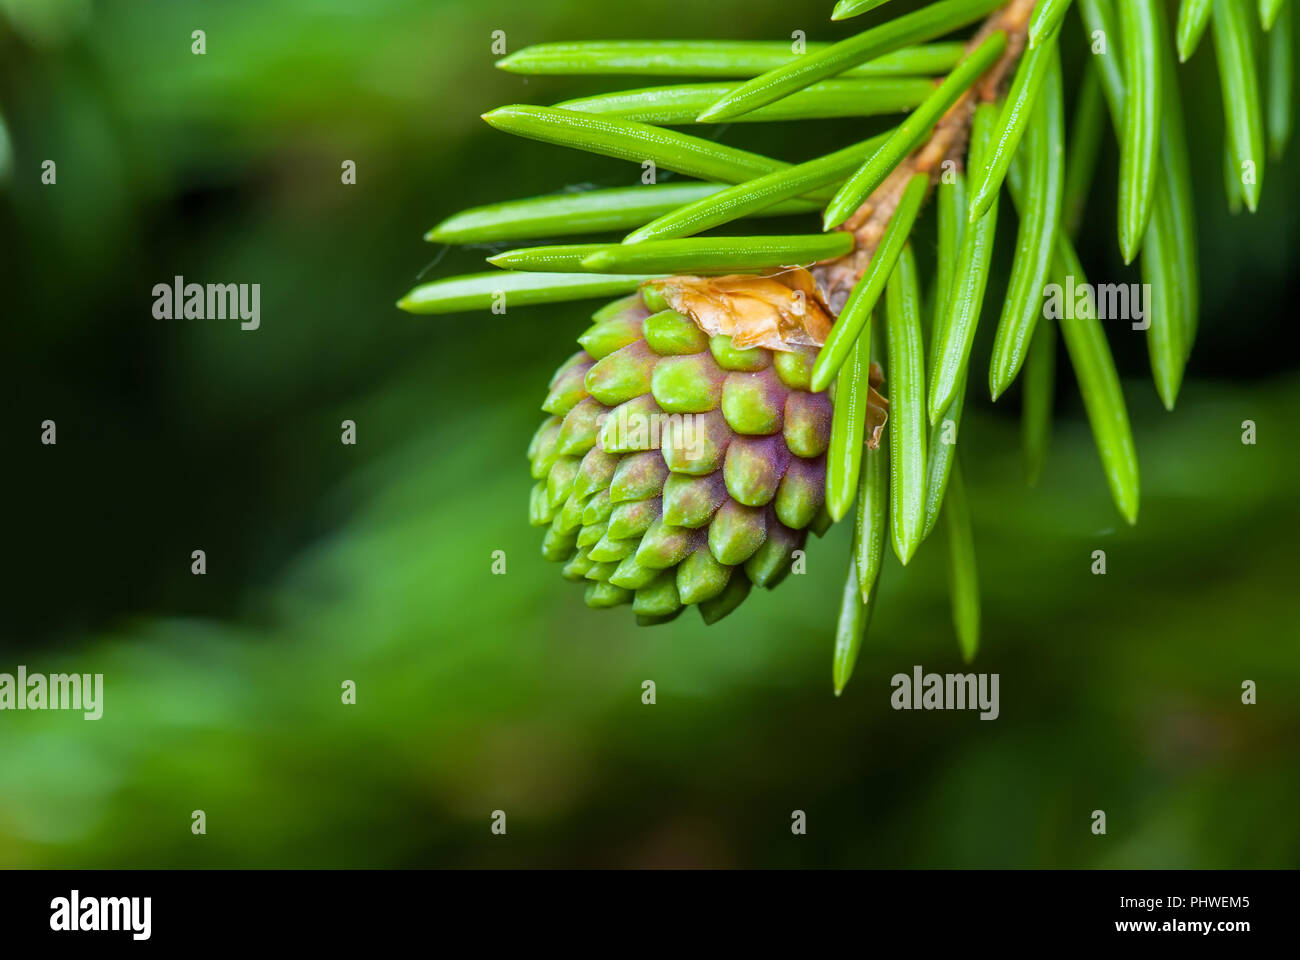 Green Fir Pine Conifer Cone Sprout Macro Stock Photo